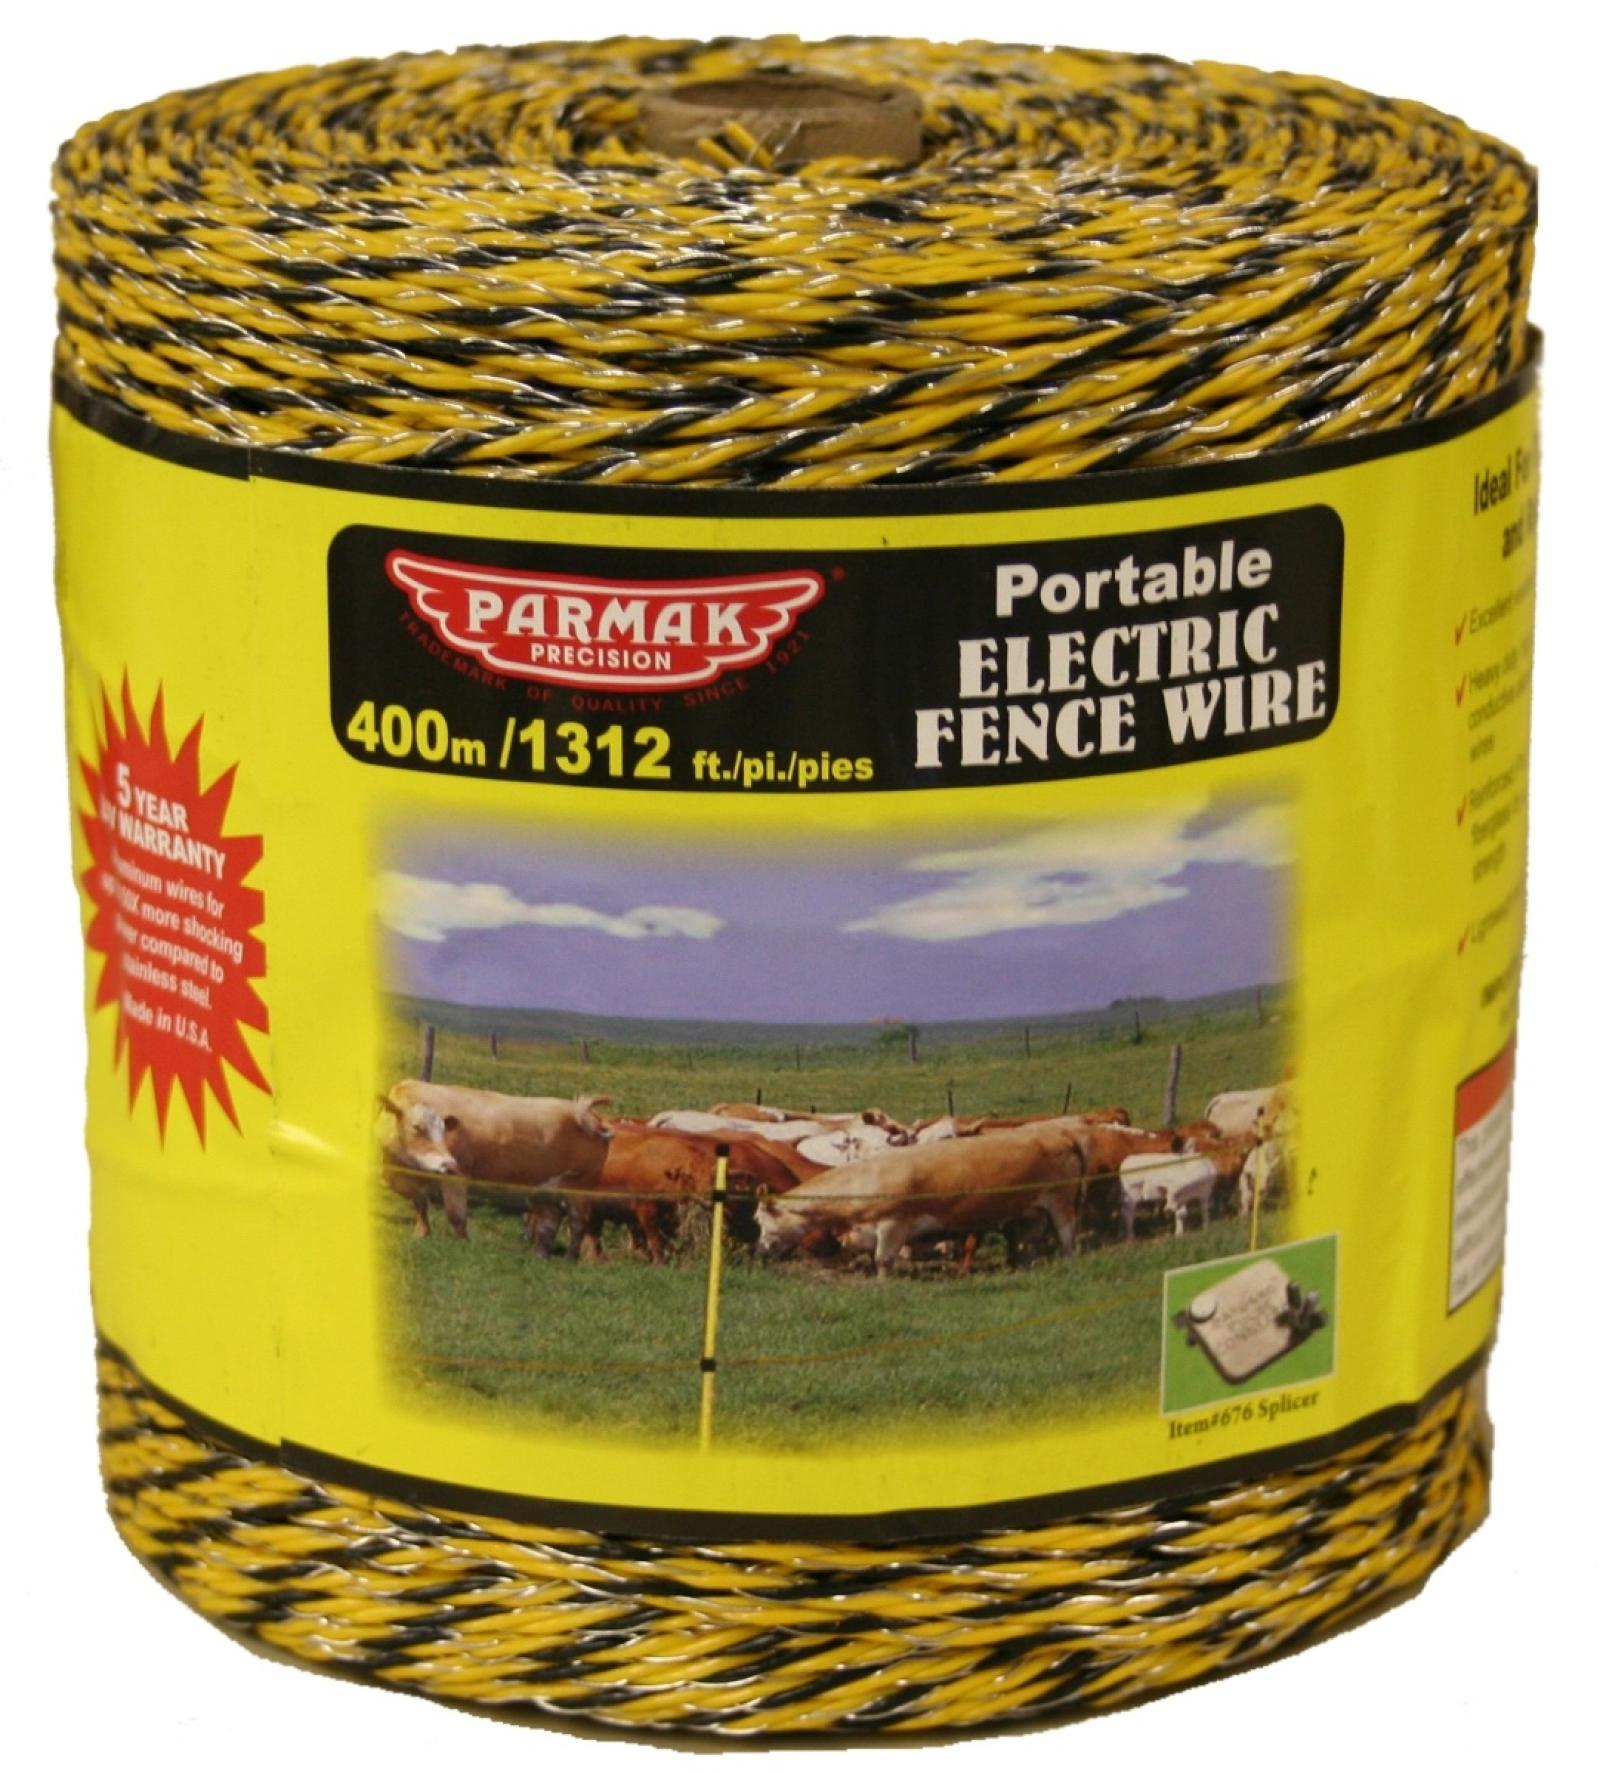 Parmak Baygard Electric Fence Wire 400m/1312ft